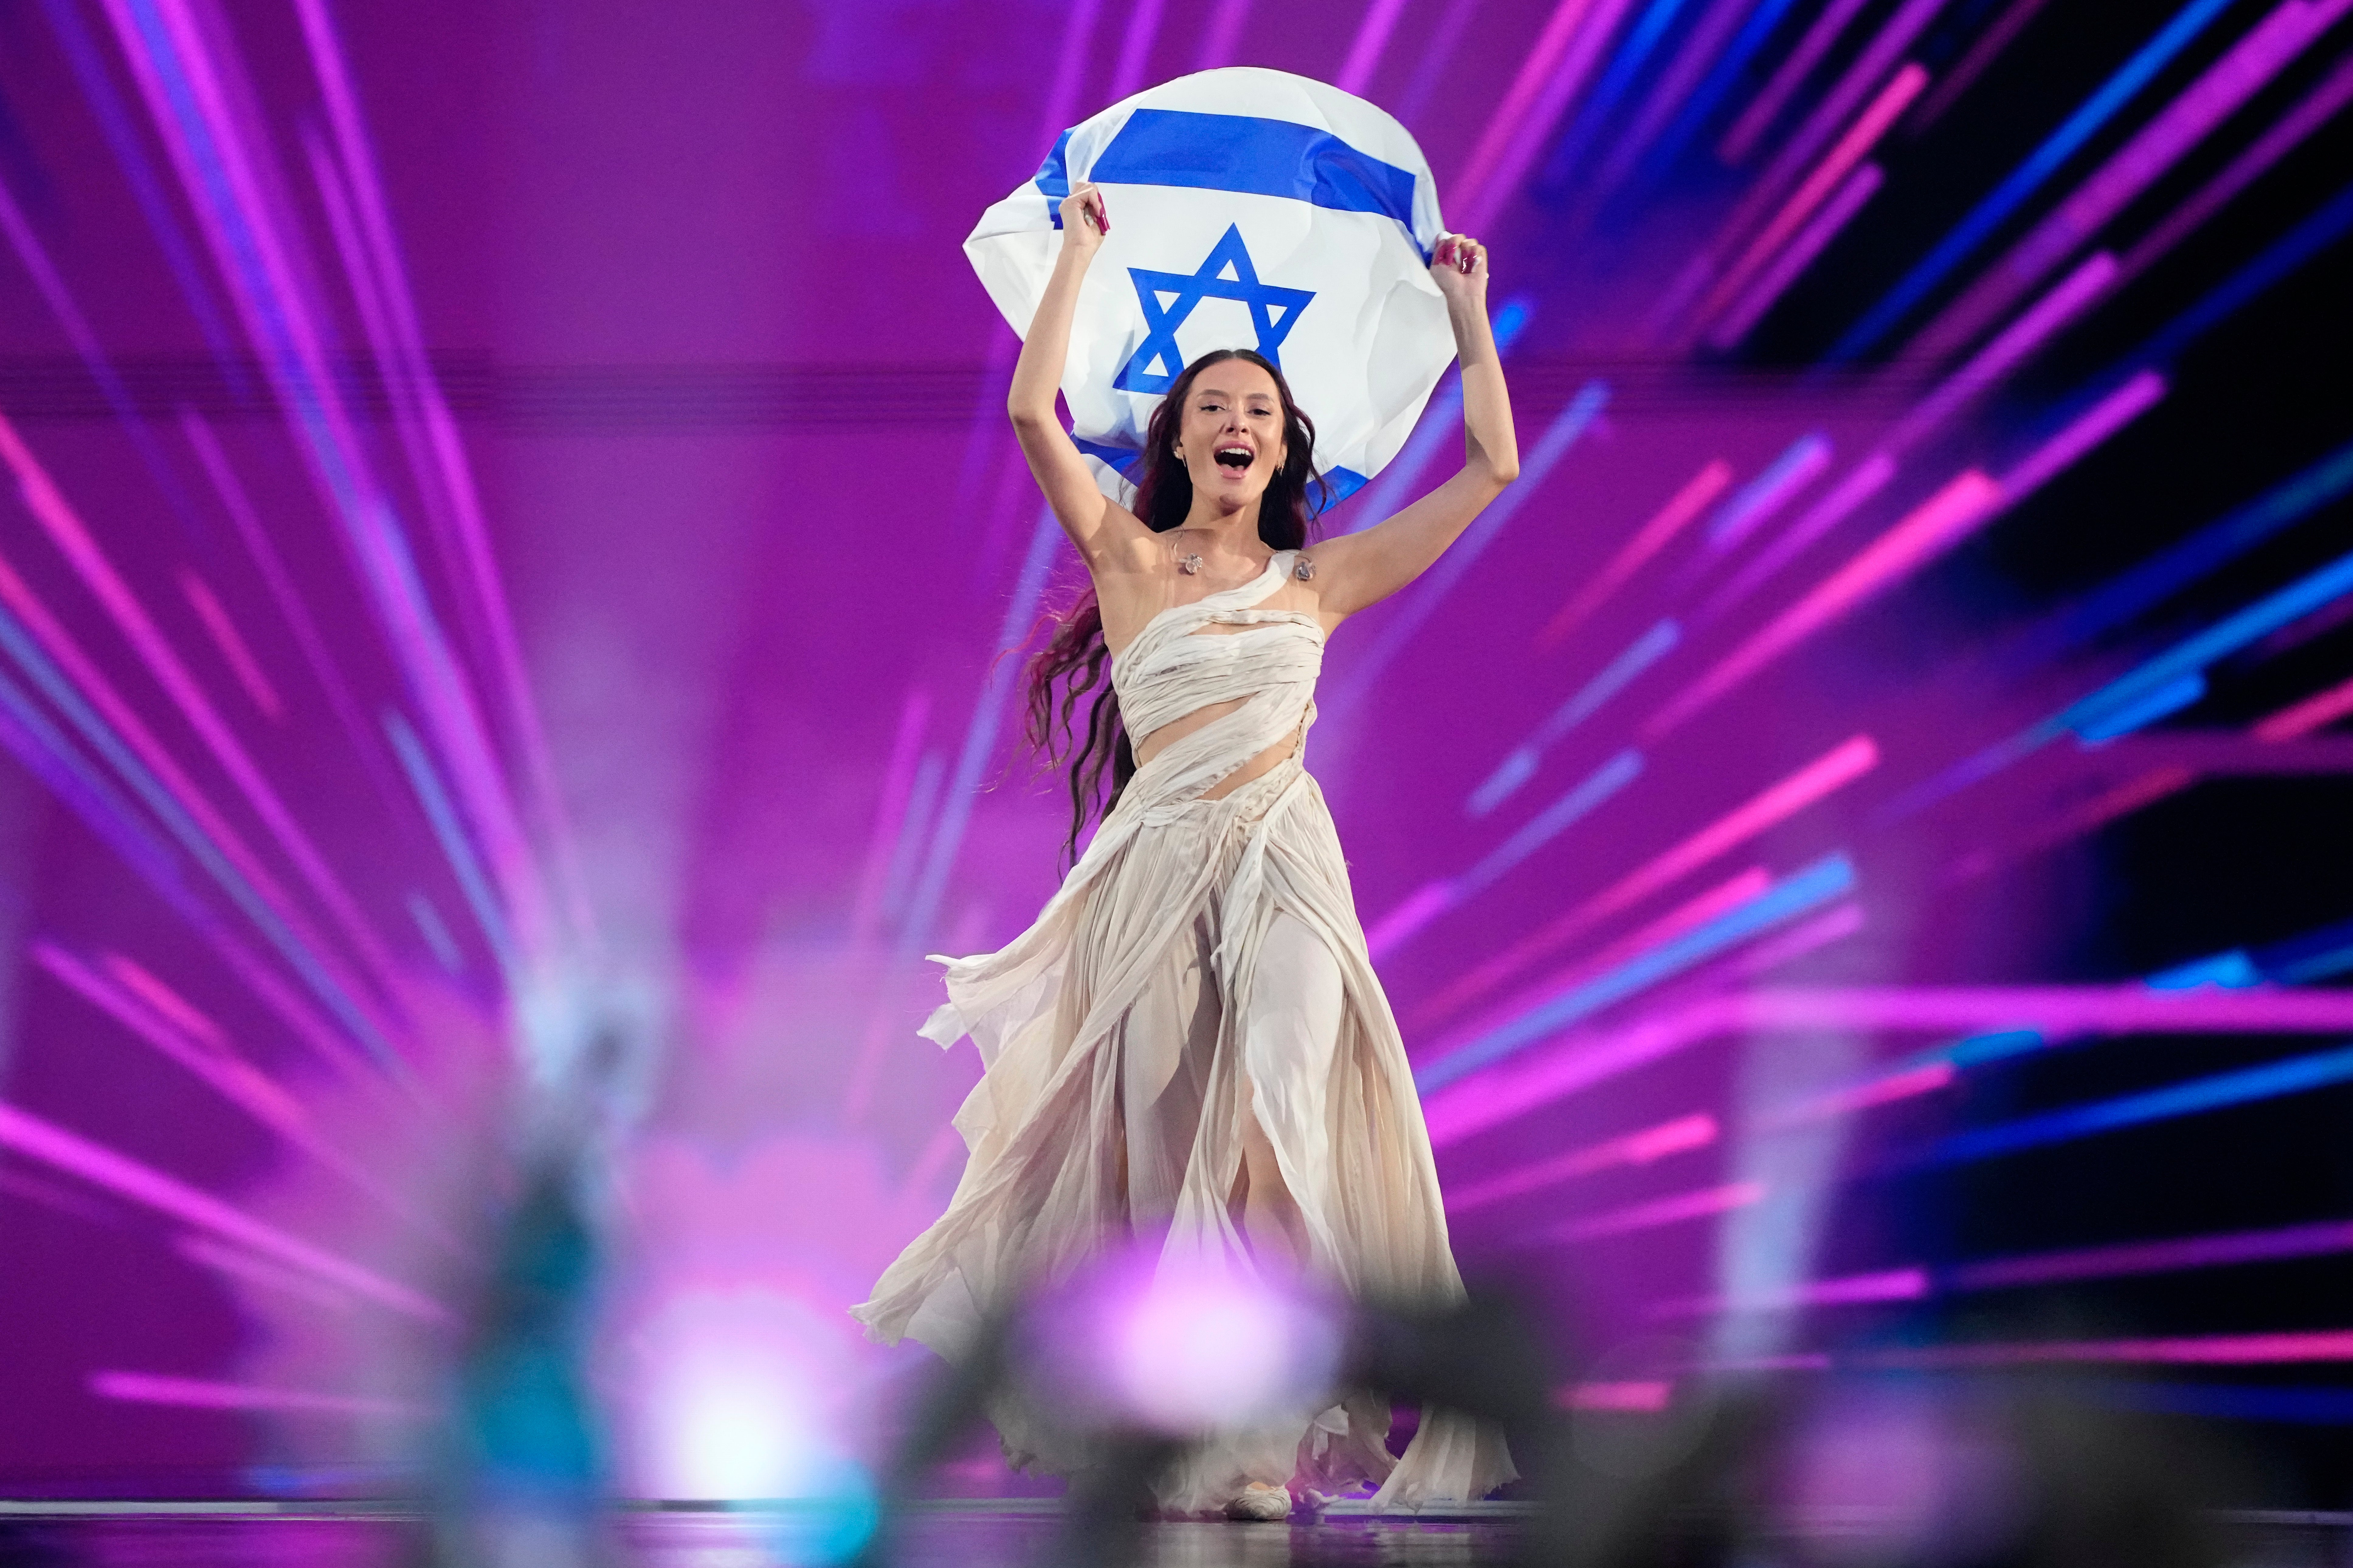 Eden Golan of Israel enters the arena during the flag parade before the Grand Final of the Eurovision Song Contest